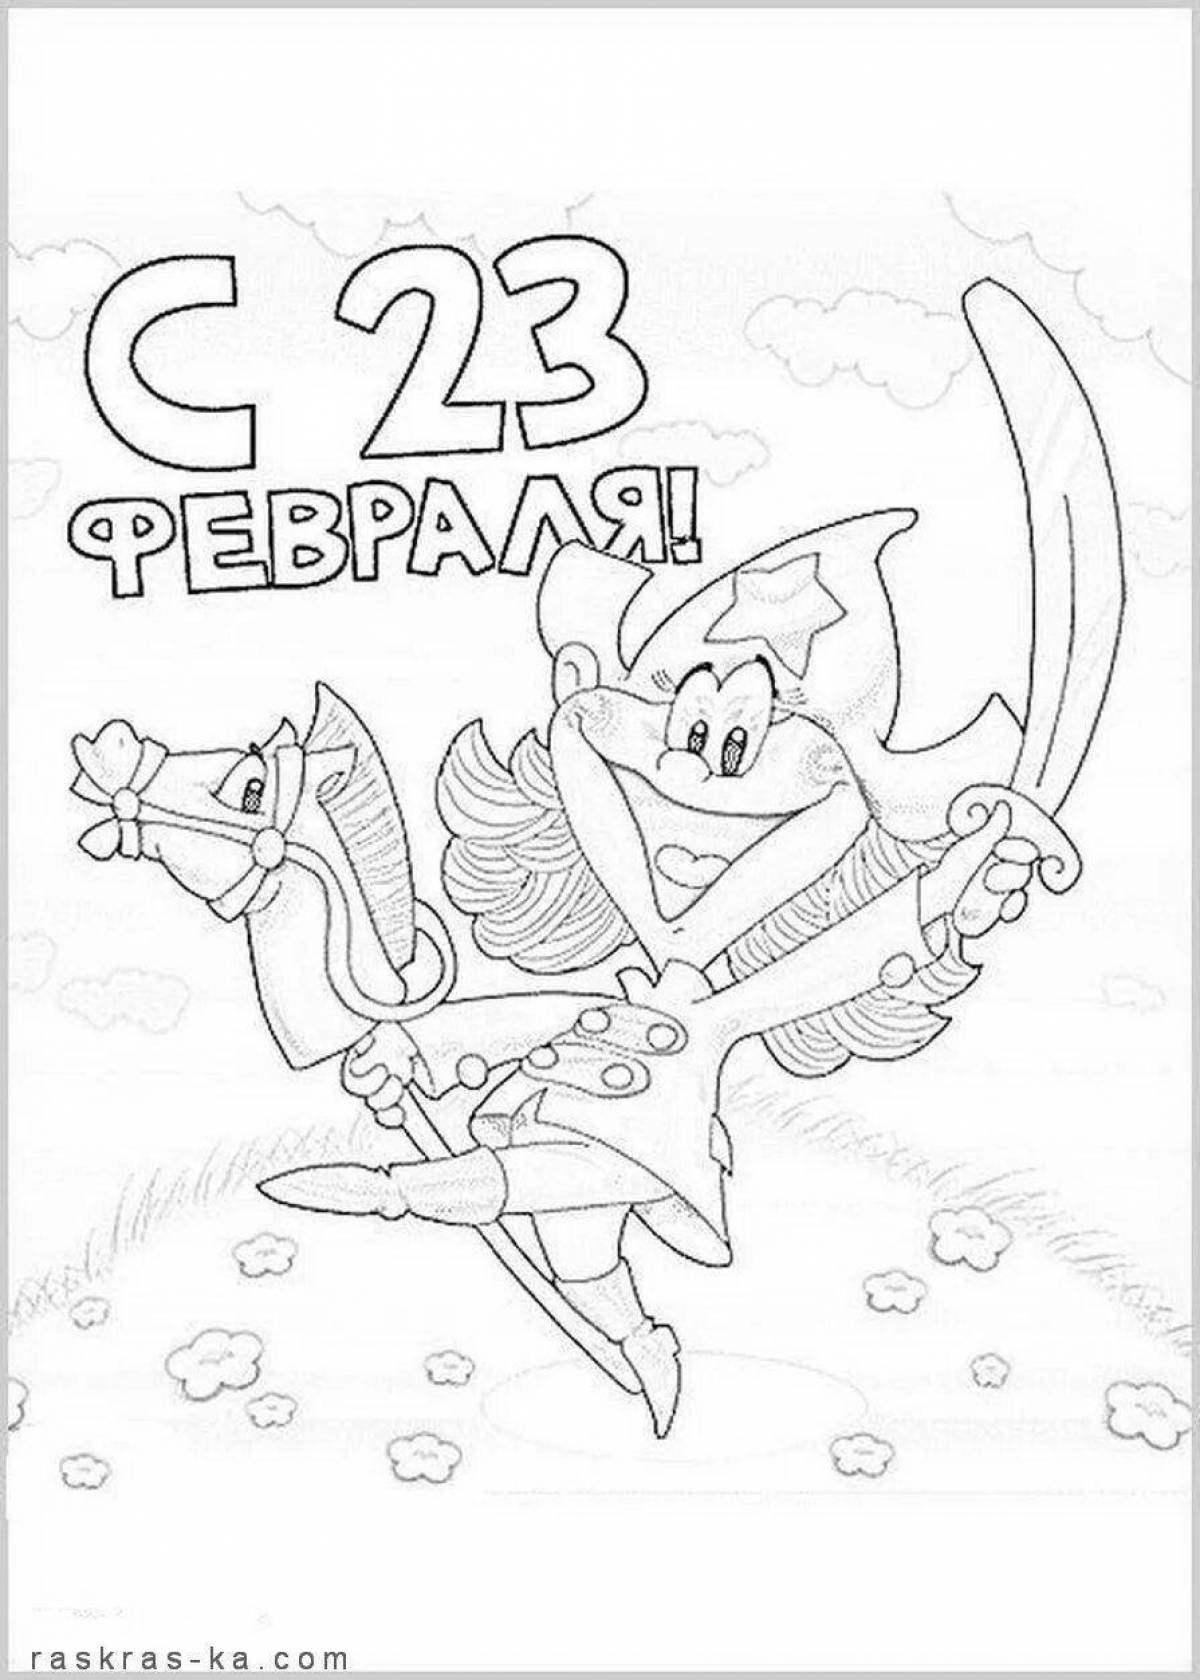 Creative coloring page February 23 in kindergarten